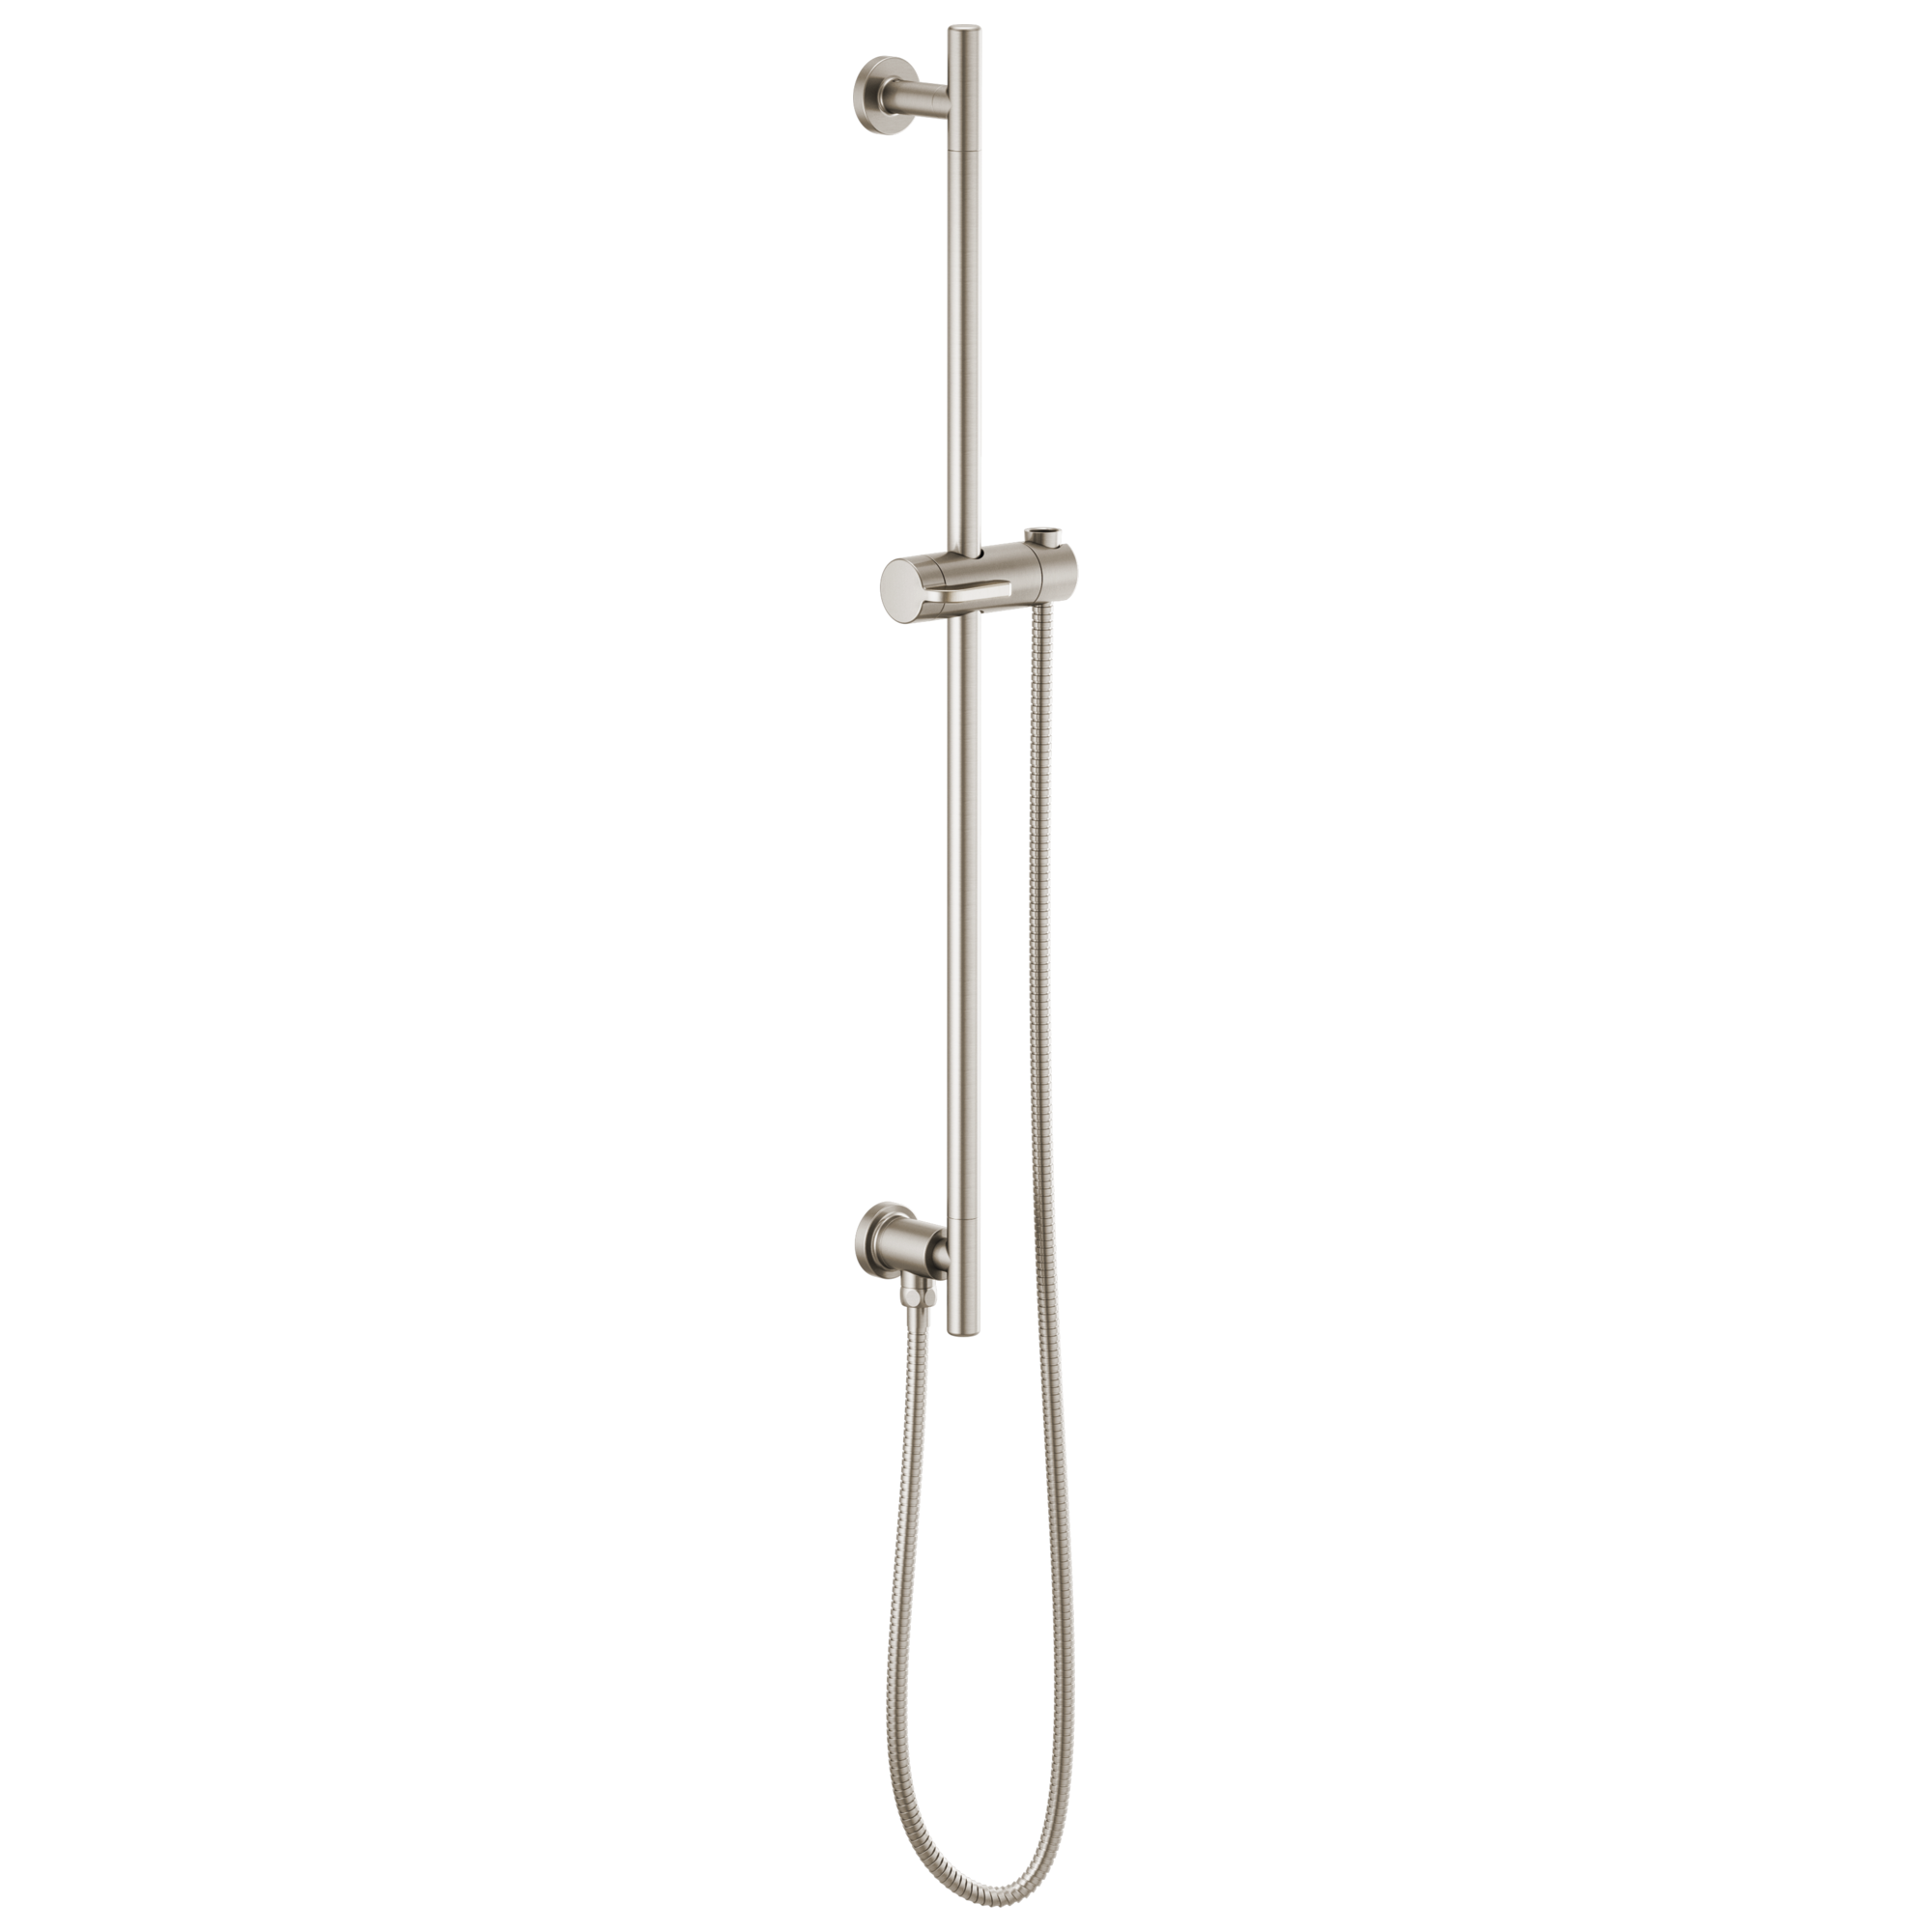 Brizo Universal Showering Linear Round Slide Bar With Hose